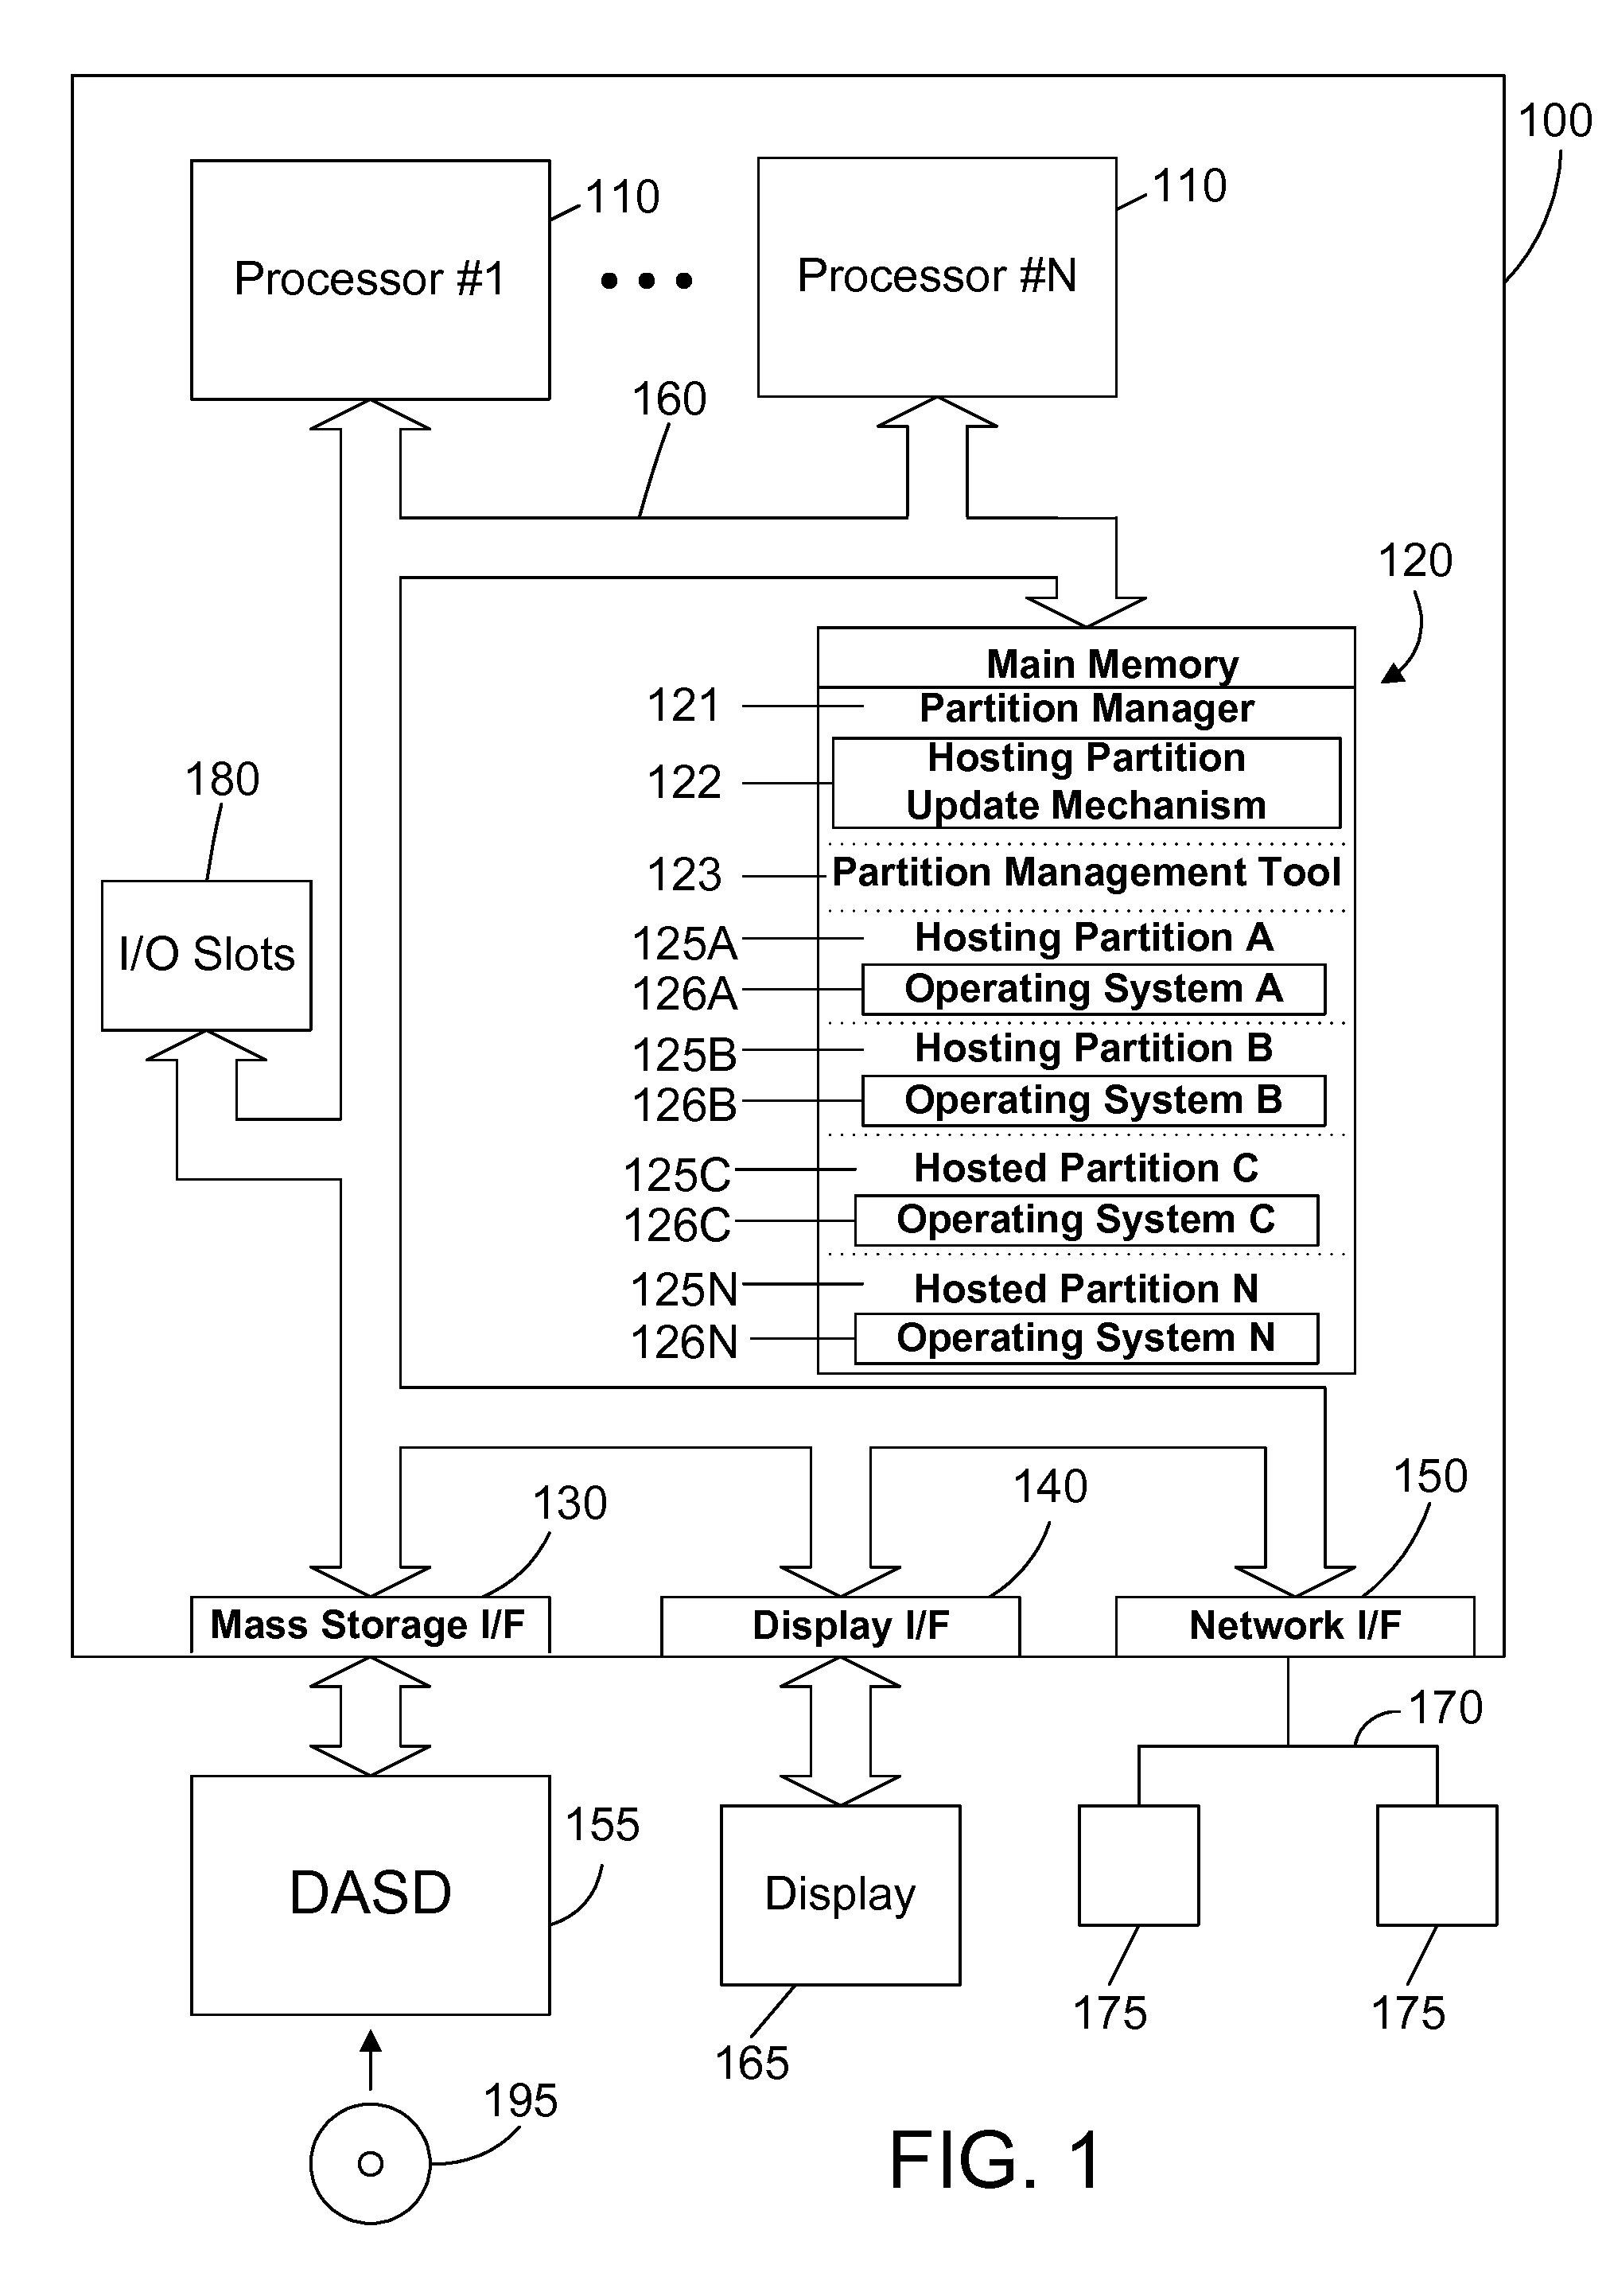 Apparatus and method for updating I/O capability of a logically-partitioned computer system